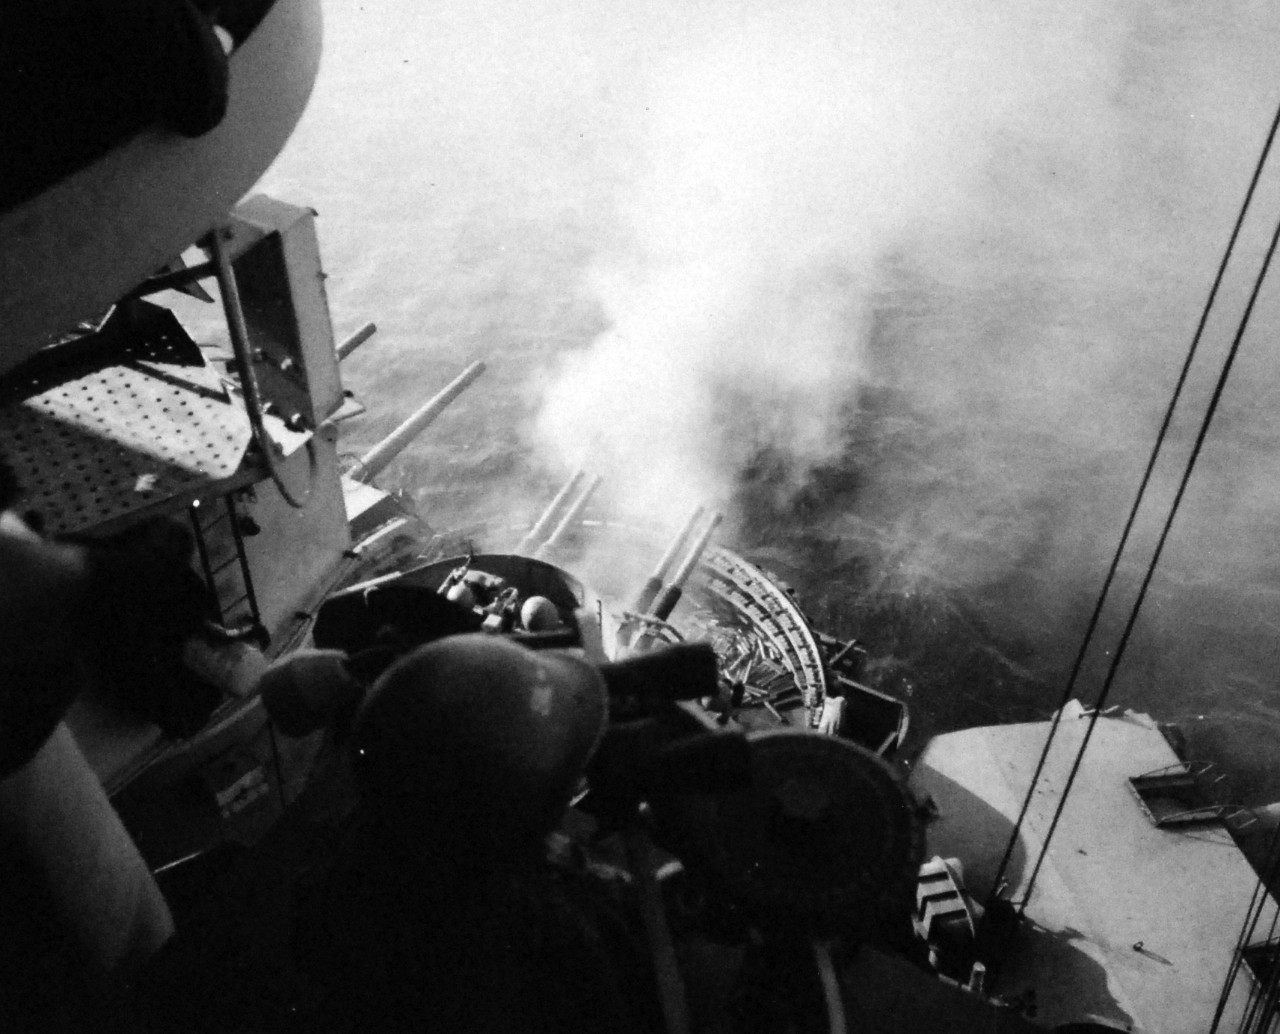 80-G-307121: Battle for Iwo Jima, February-March 1945.  Shown:  Firing into cave on Mt. Suribachi by the 40 mm guns of USS Nevada (BB-36).  Photographed by USS Nevada (BB 36), February 17, 1945.  U.S. Navy photograph, now in the collections of the National Archives.  